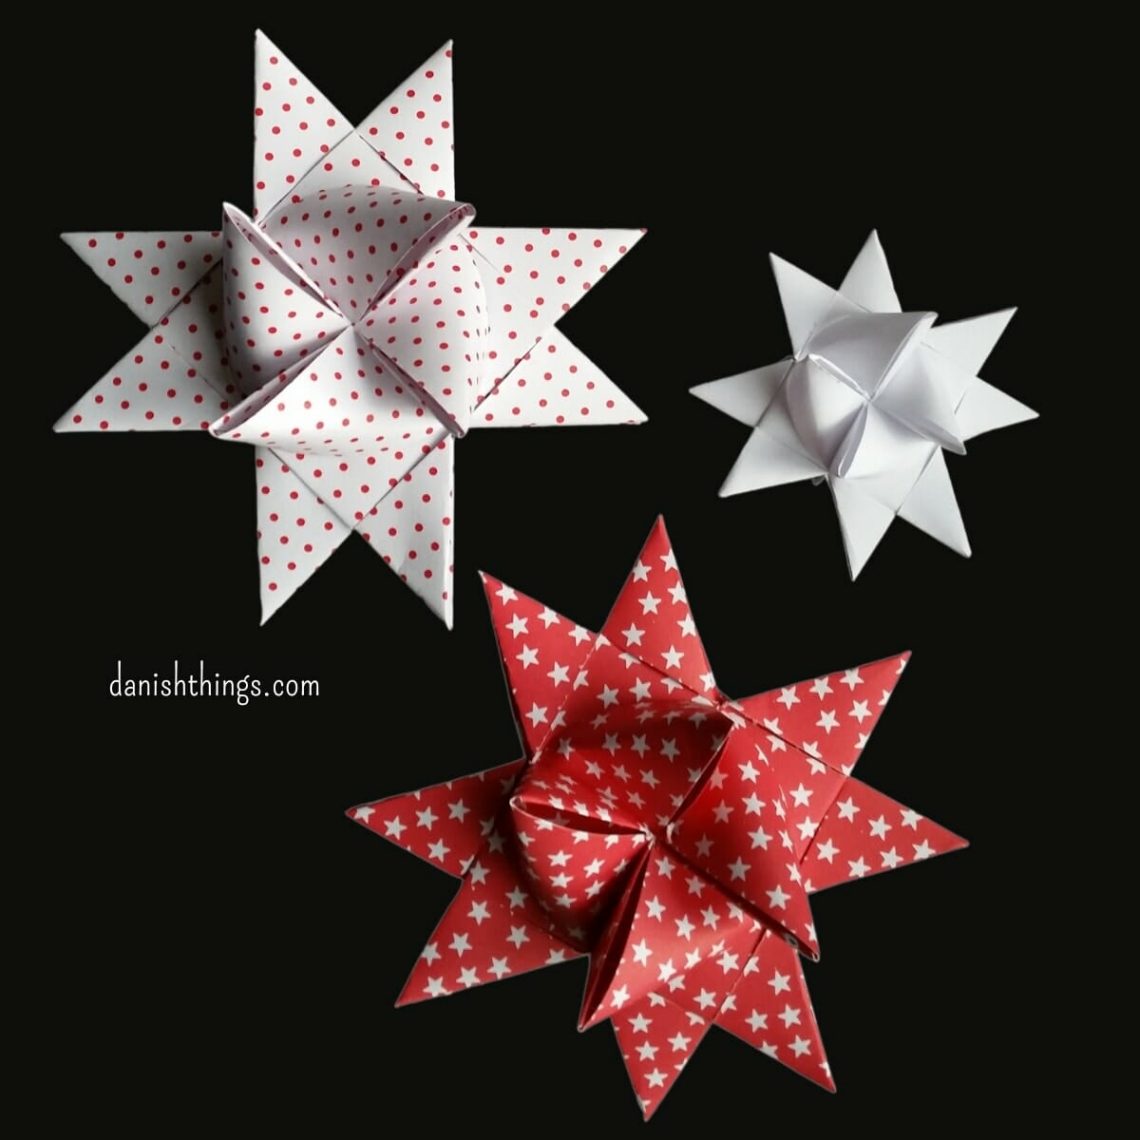 How to make a Froebel star - a classic Danish Christmas decoration. A Christmas star - step-by-step guide. Whether you weave or fold paper stars, if you are a beginner or experienced, you will get help with text, photos, and videos for every step. Find recipes, step-by-step guides, free print, and inspiration for this time of year at danishthings.com © Christel Parby - Danish Things #DanishThings #froebelstar #frobelstern #paperstar #paper #star #howto #howtoguide #danish #christmas #decoration #homemade #decoration #danishchristmas #danishstar #adventstar #advent #nordic #german #christmasstar